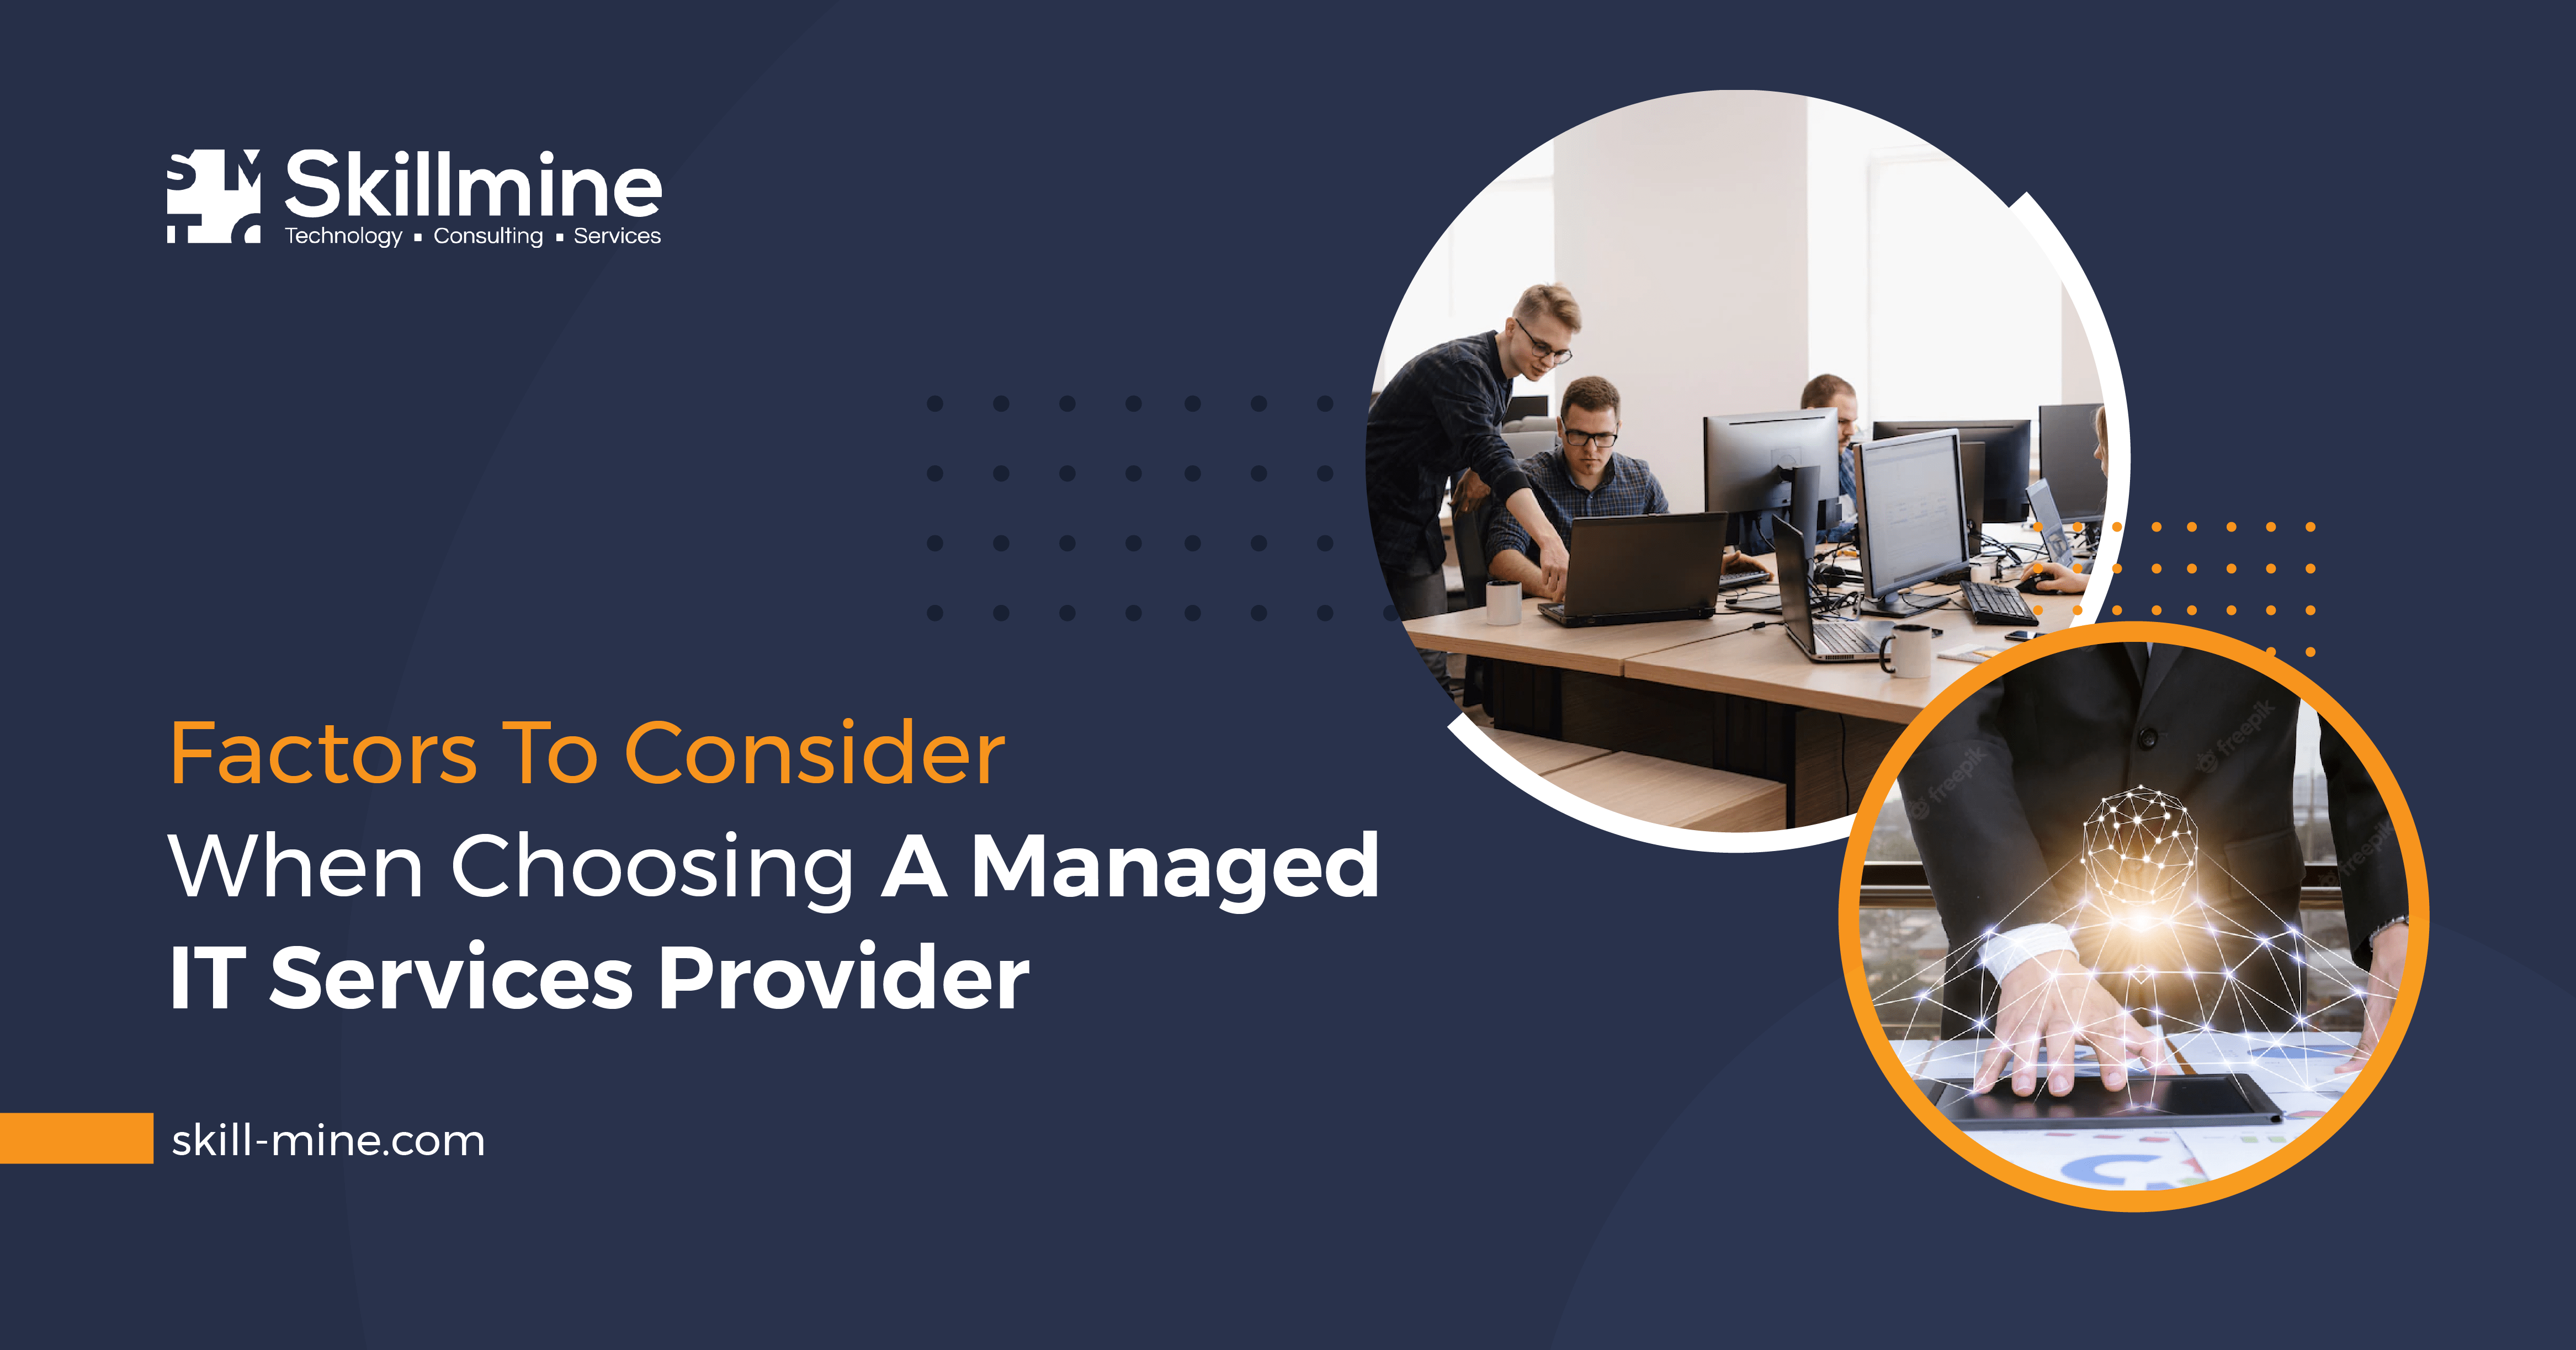 FACTORS TO CONSIDER WHEN CHOOSING A MANAGED IT SERVICES PROVIDER